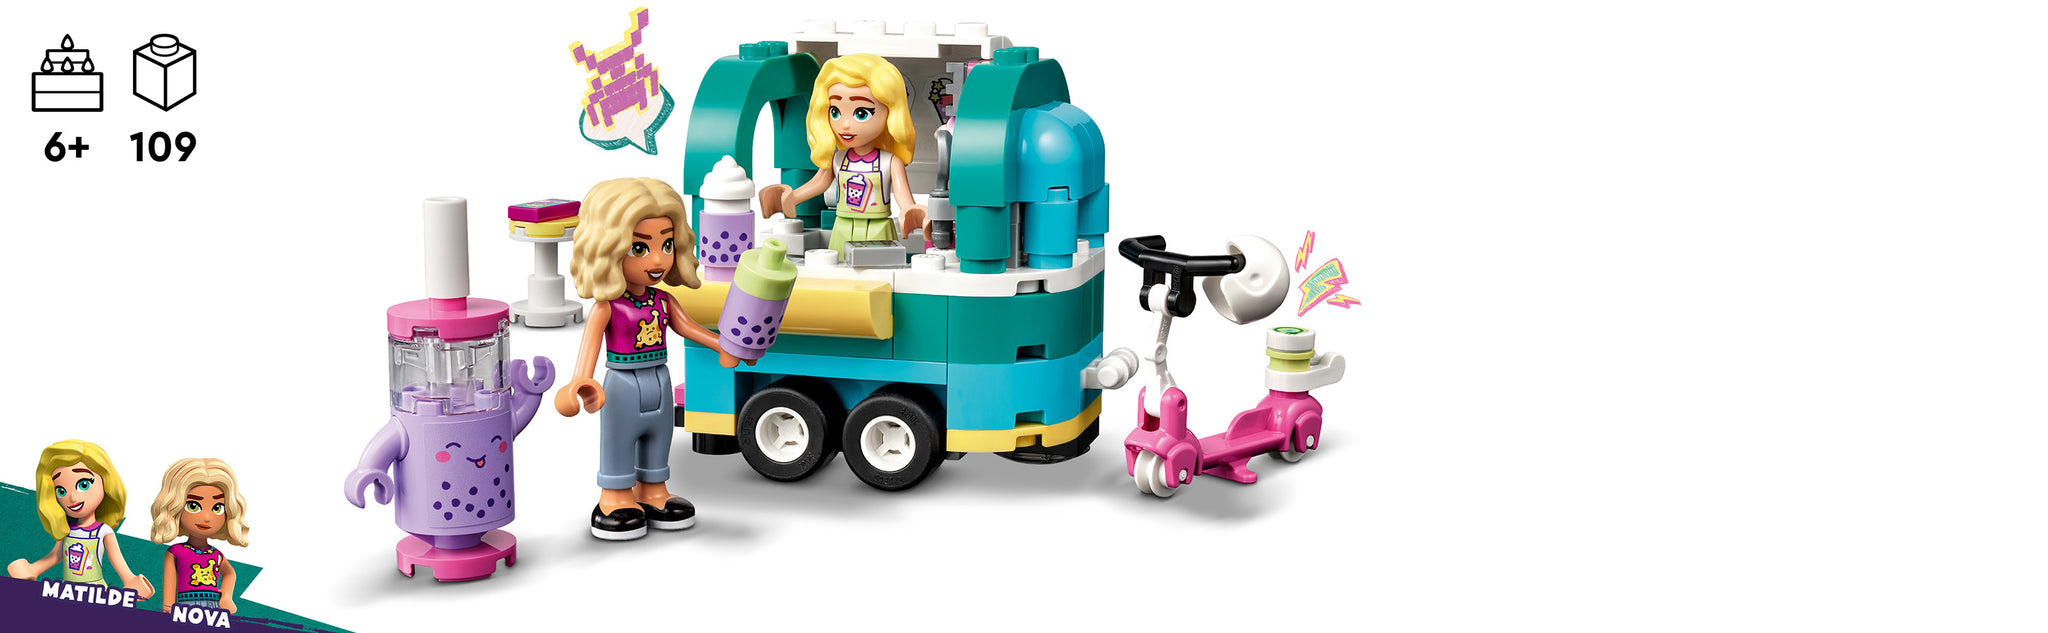 https://www.2ttoys.nl/pages/lego-41733-mobiele-bubbelthee-stand